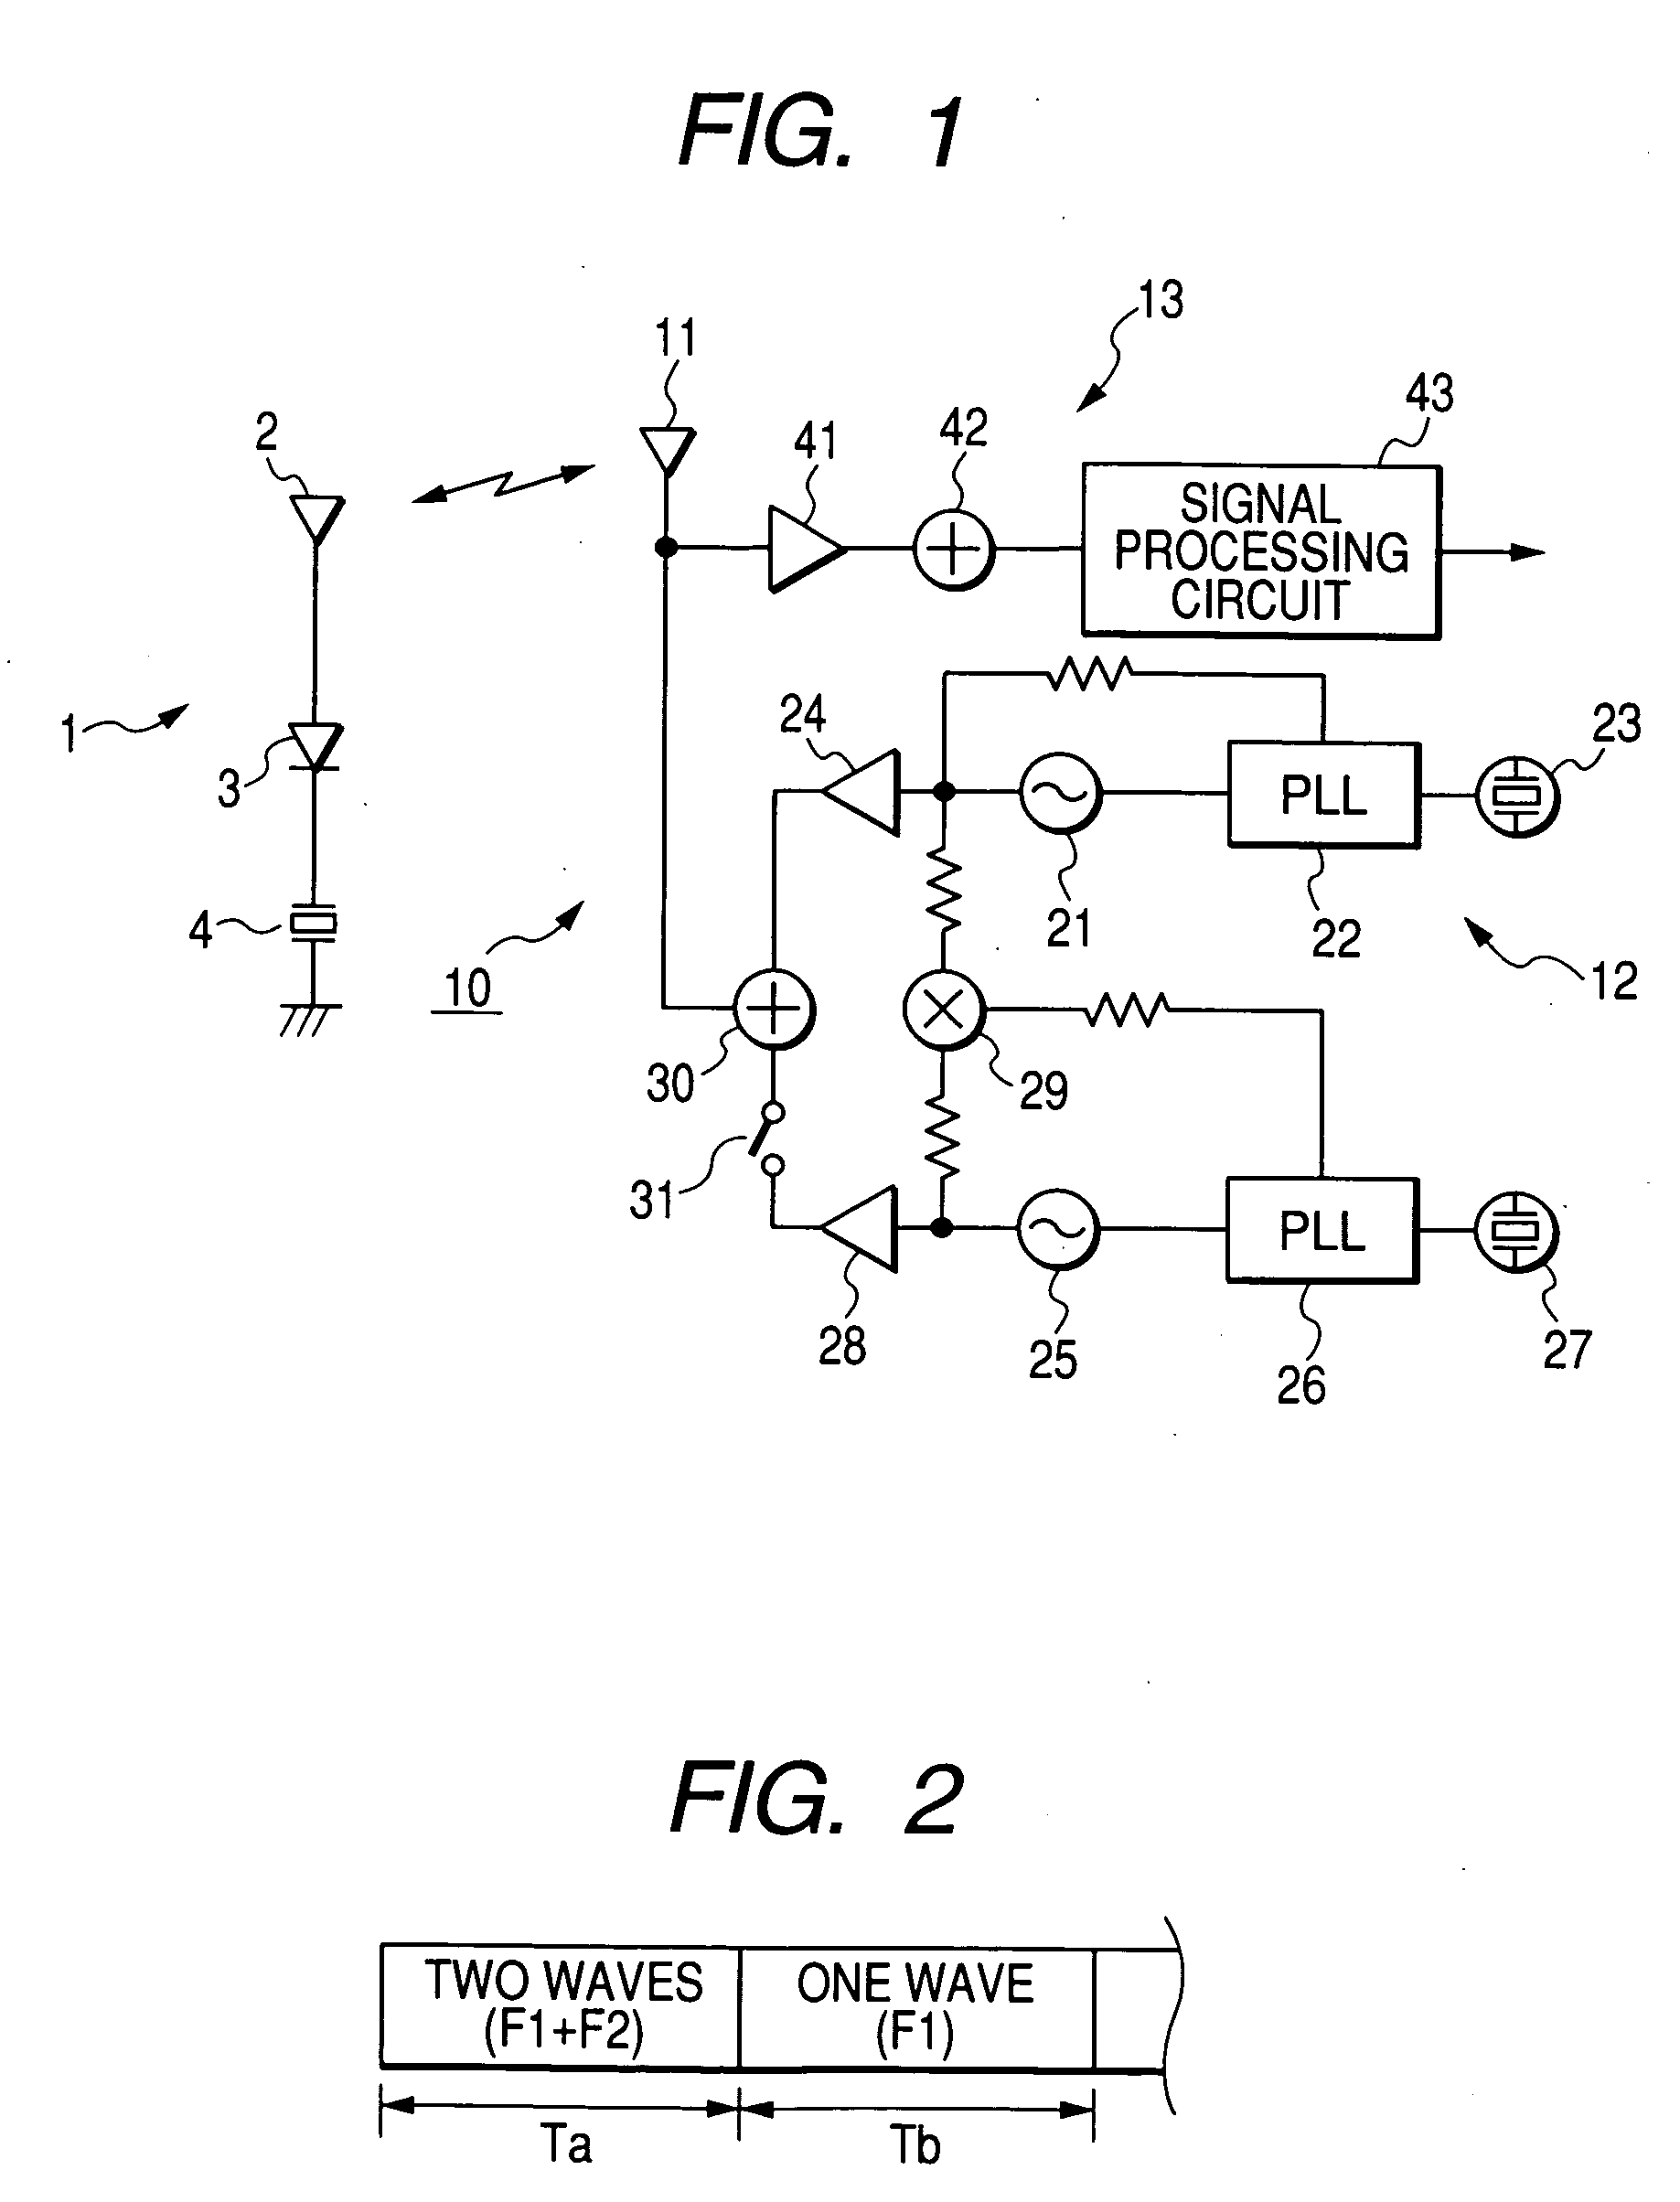 Tire information detecting apparatus without distortion